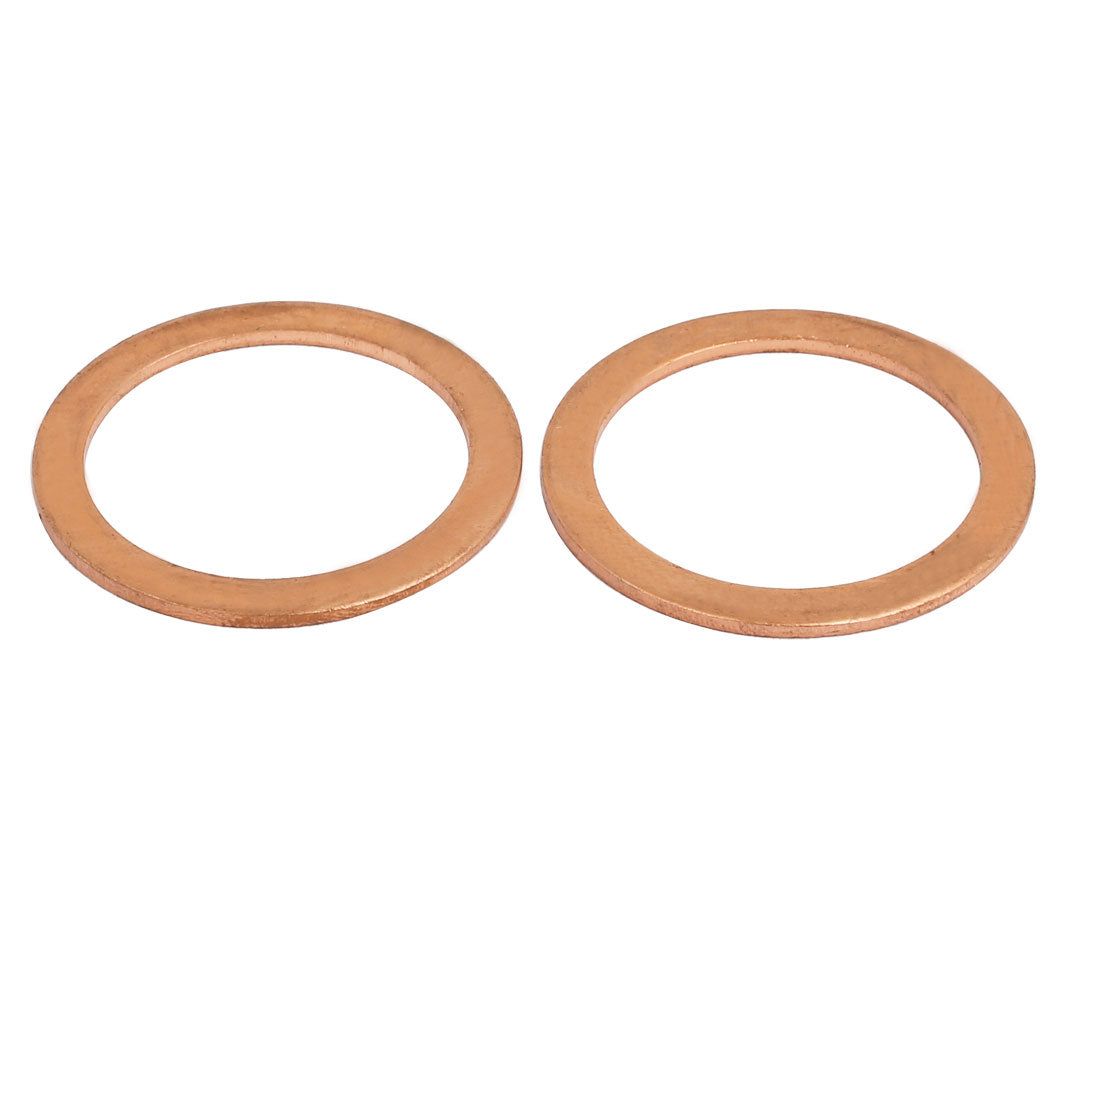 uxcell Uxcell 5pcs 28mmx36mmx1.5mm Copper Flat Ring Sealing Crush Washer Gasket